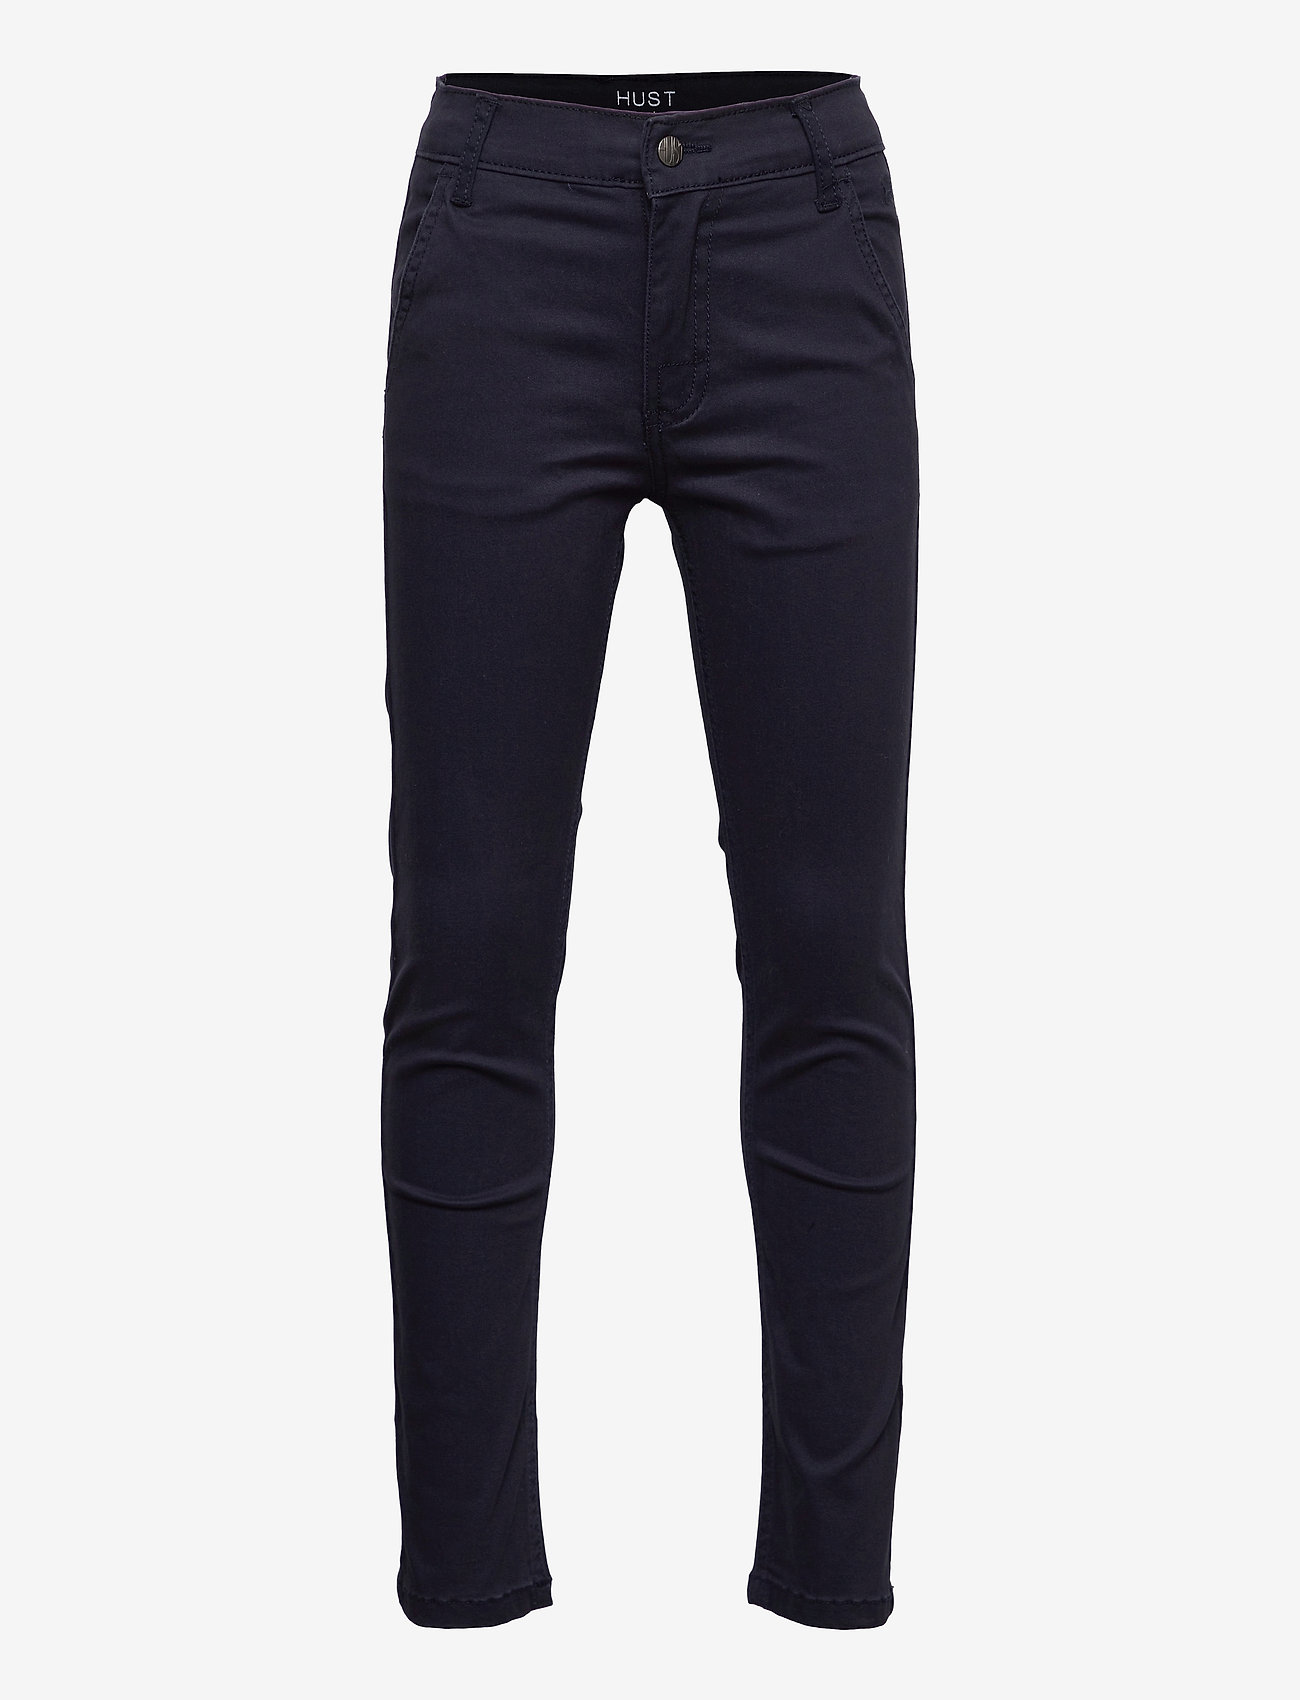 Hust & Claire - Tristan - Trousers - chino's - navy - 0